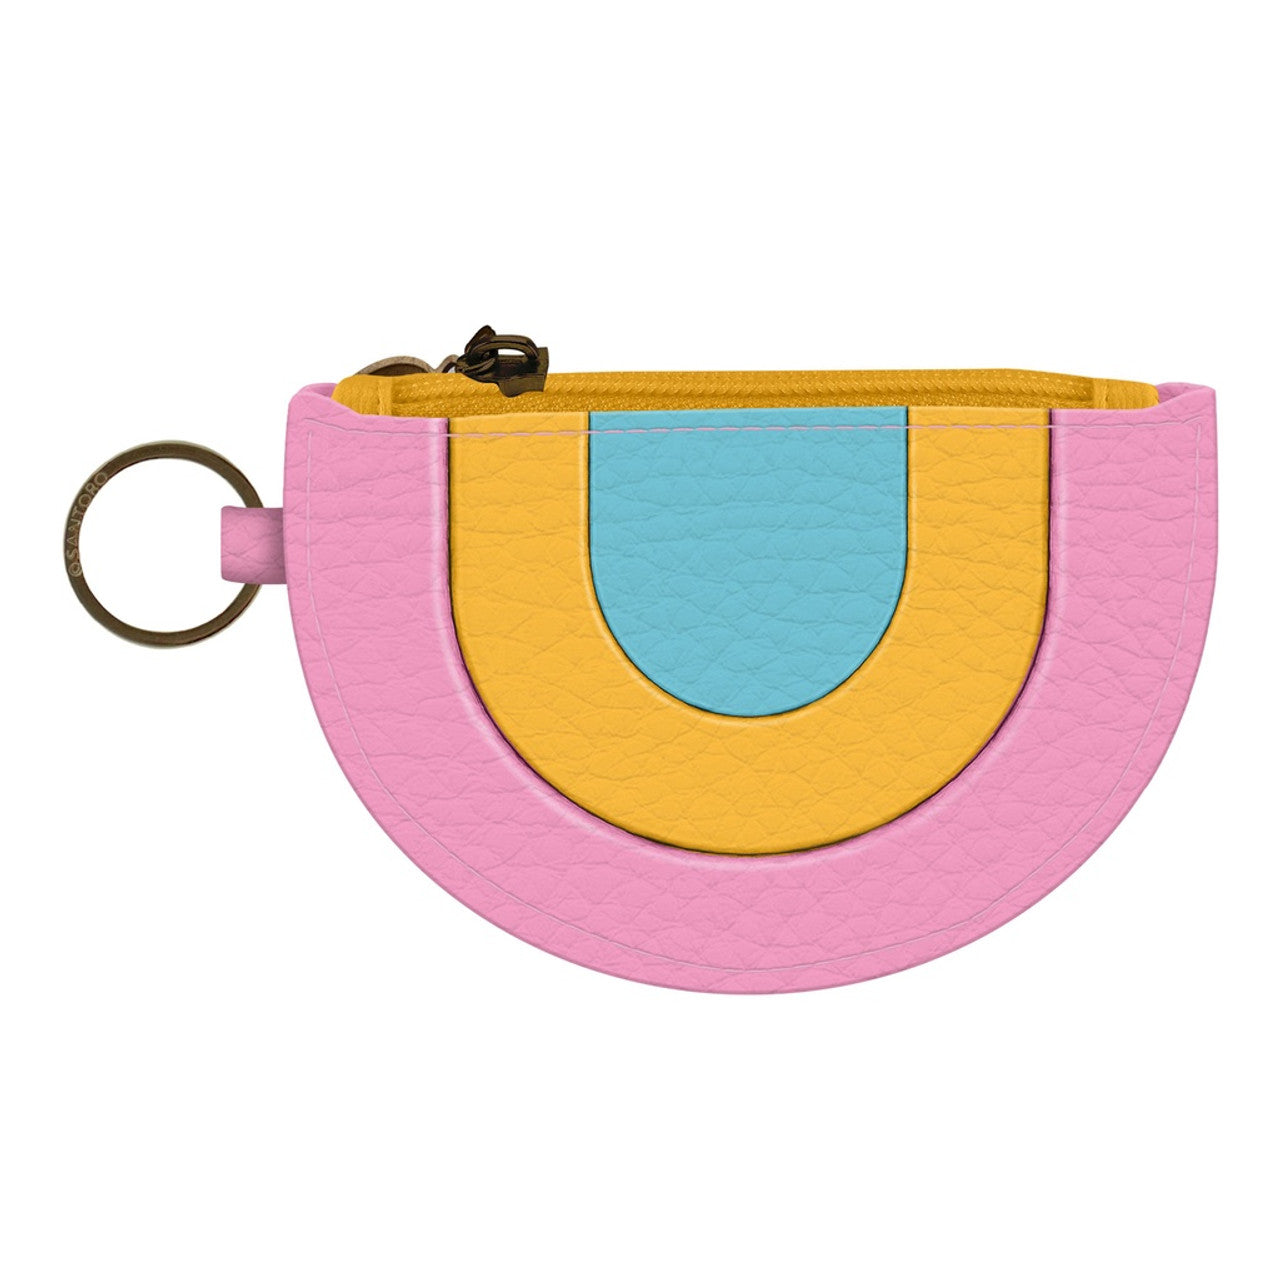 Gorjuss - Keyring Zip Purse - Be Kind To Each Other